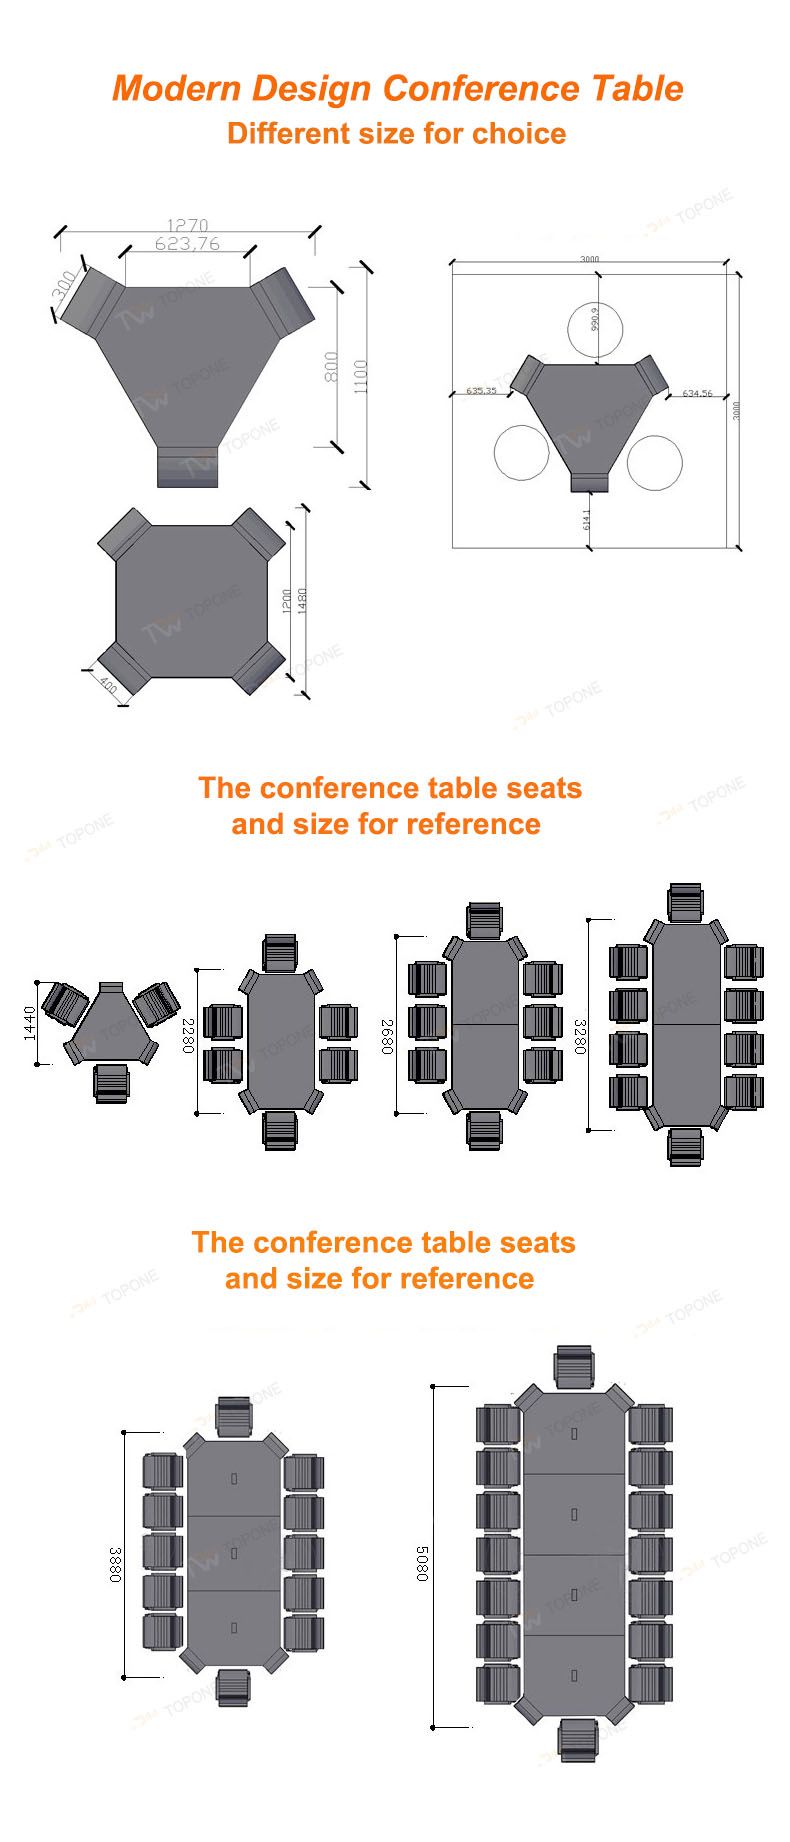 conference table size.jpg